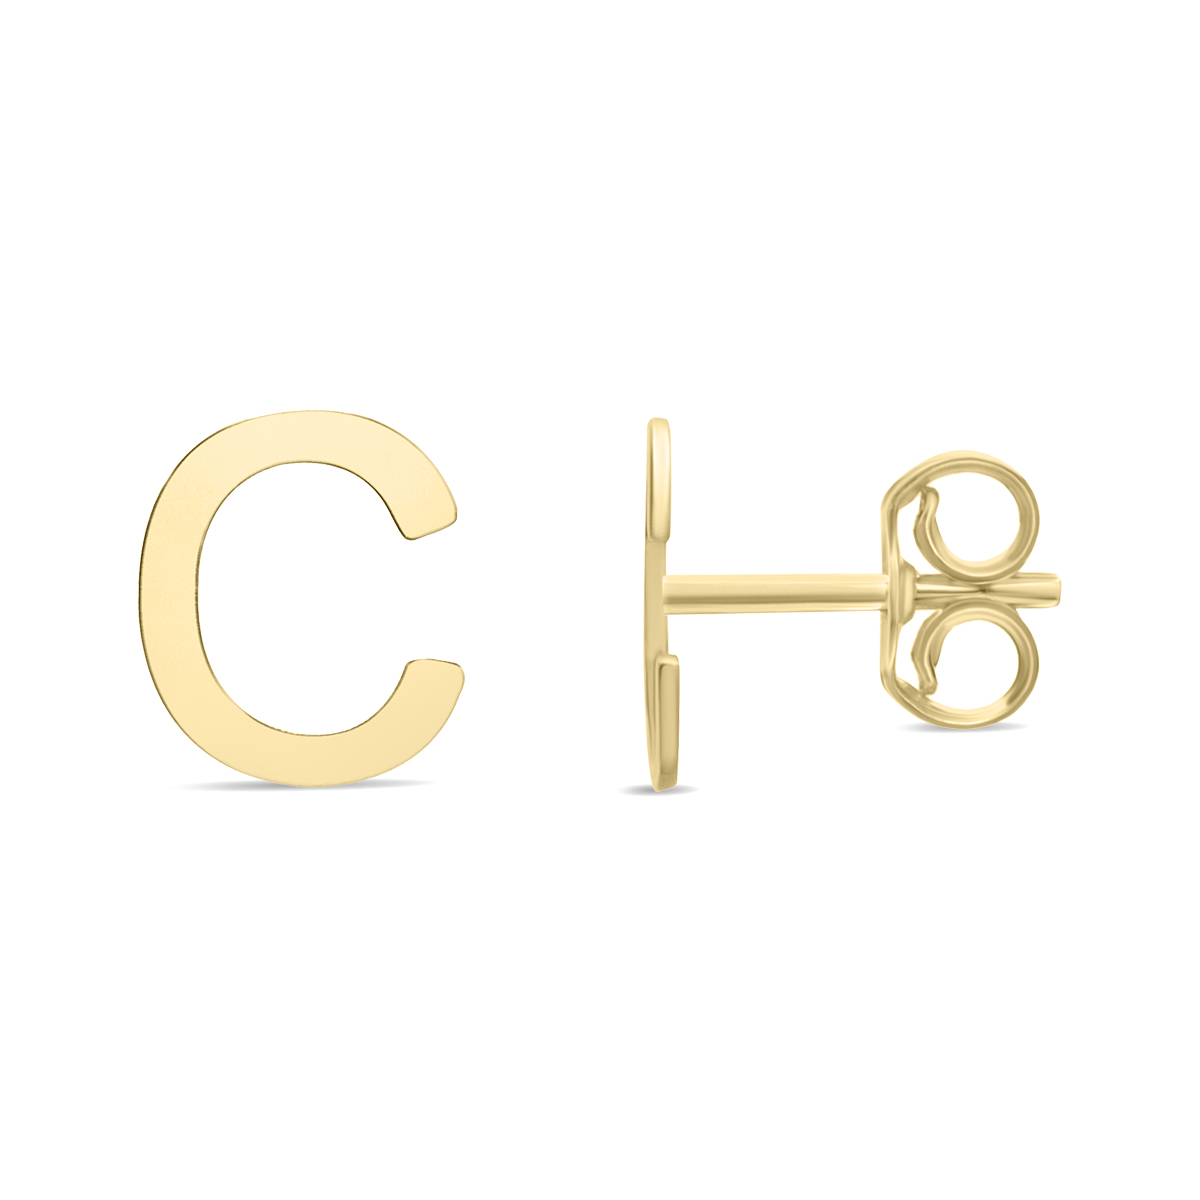 Image of 14K Solid Yellow Gold Initial C Stud Earrings